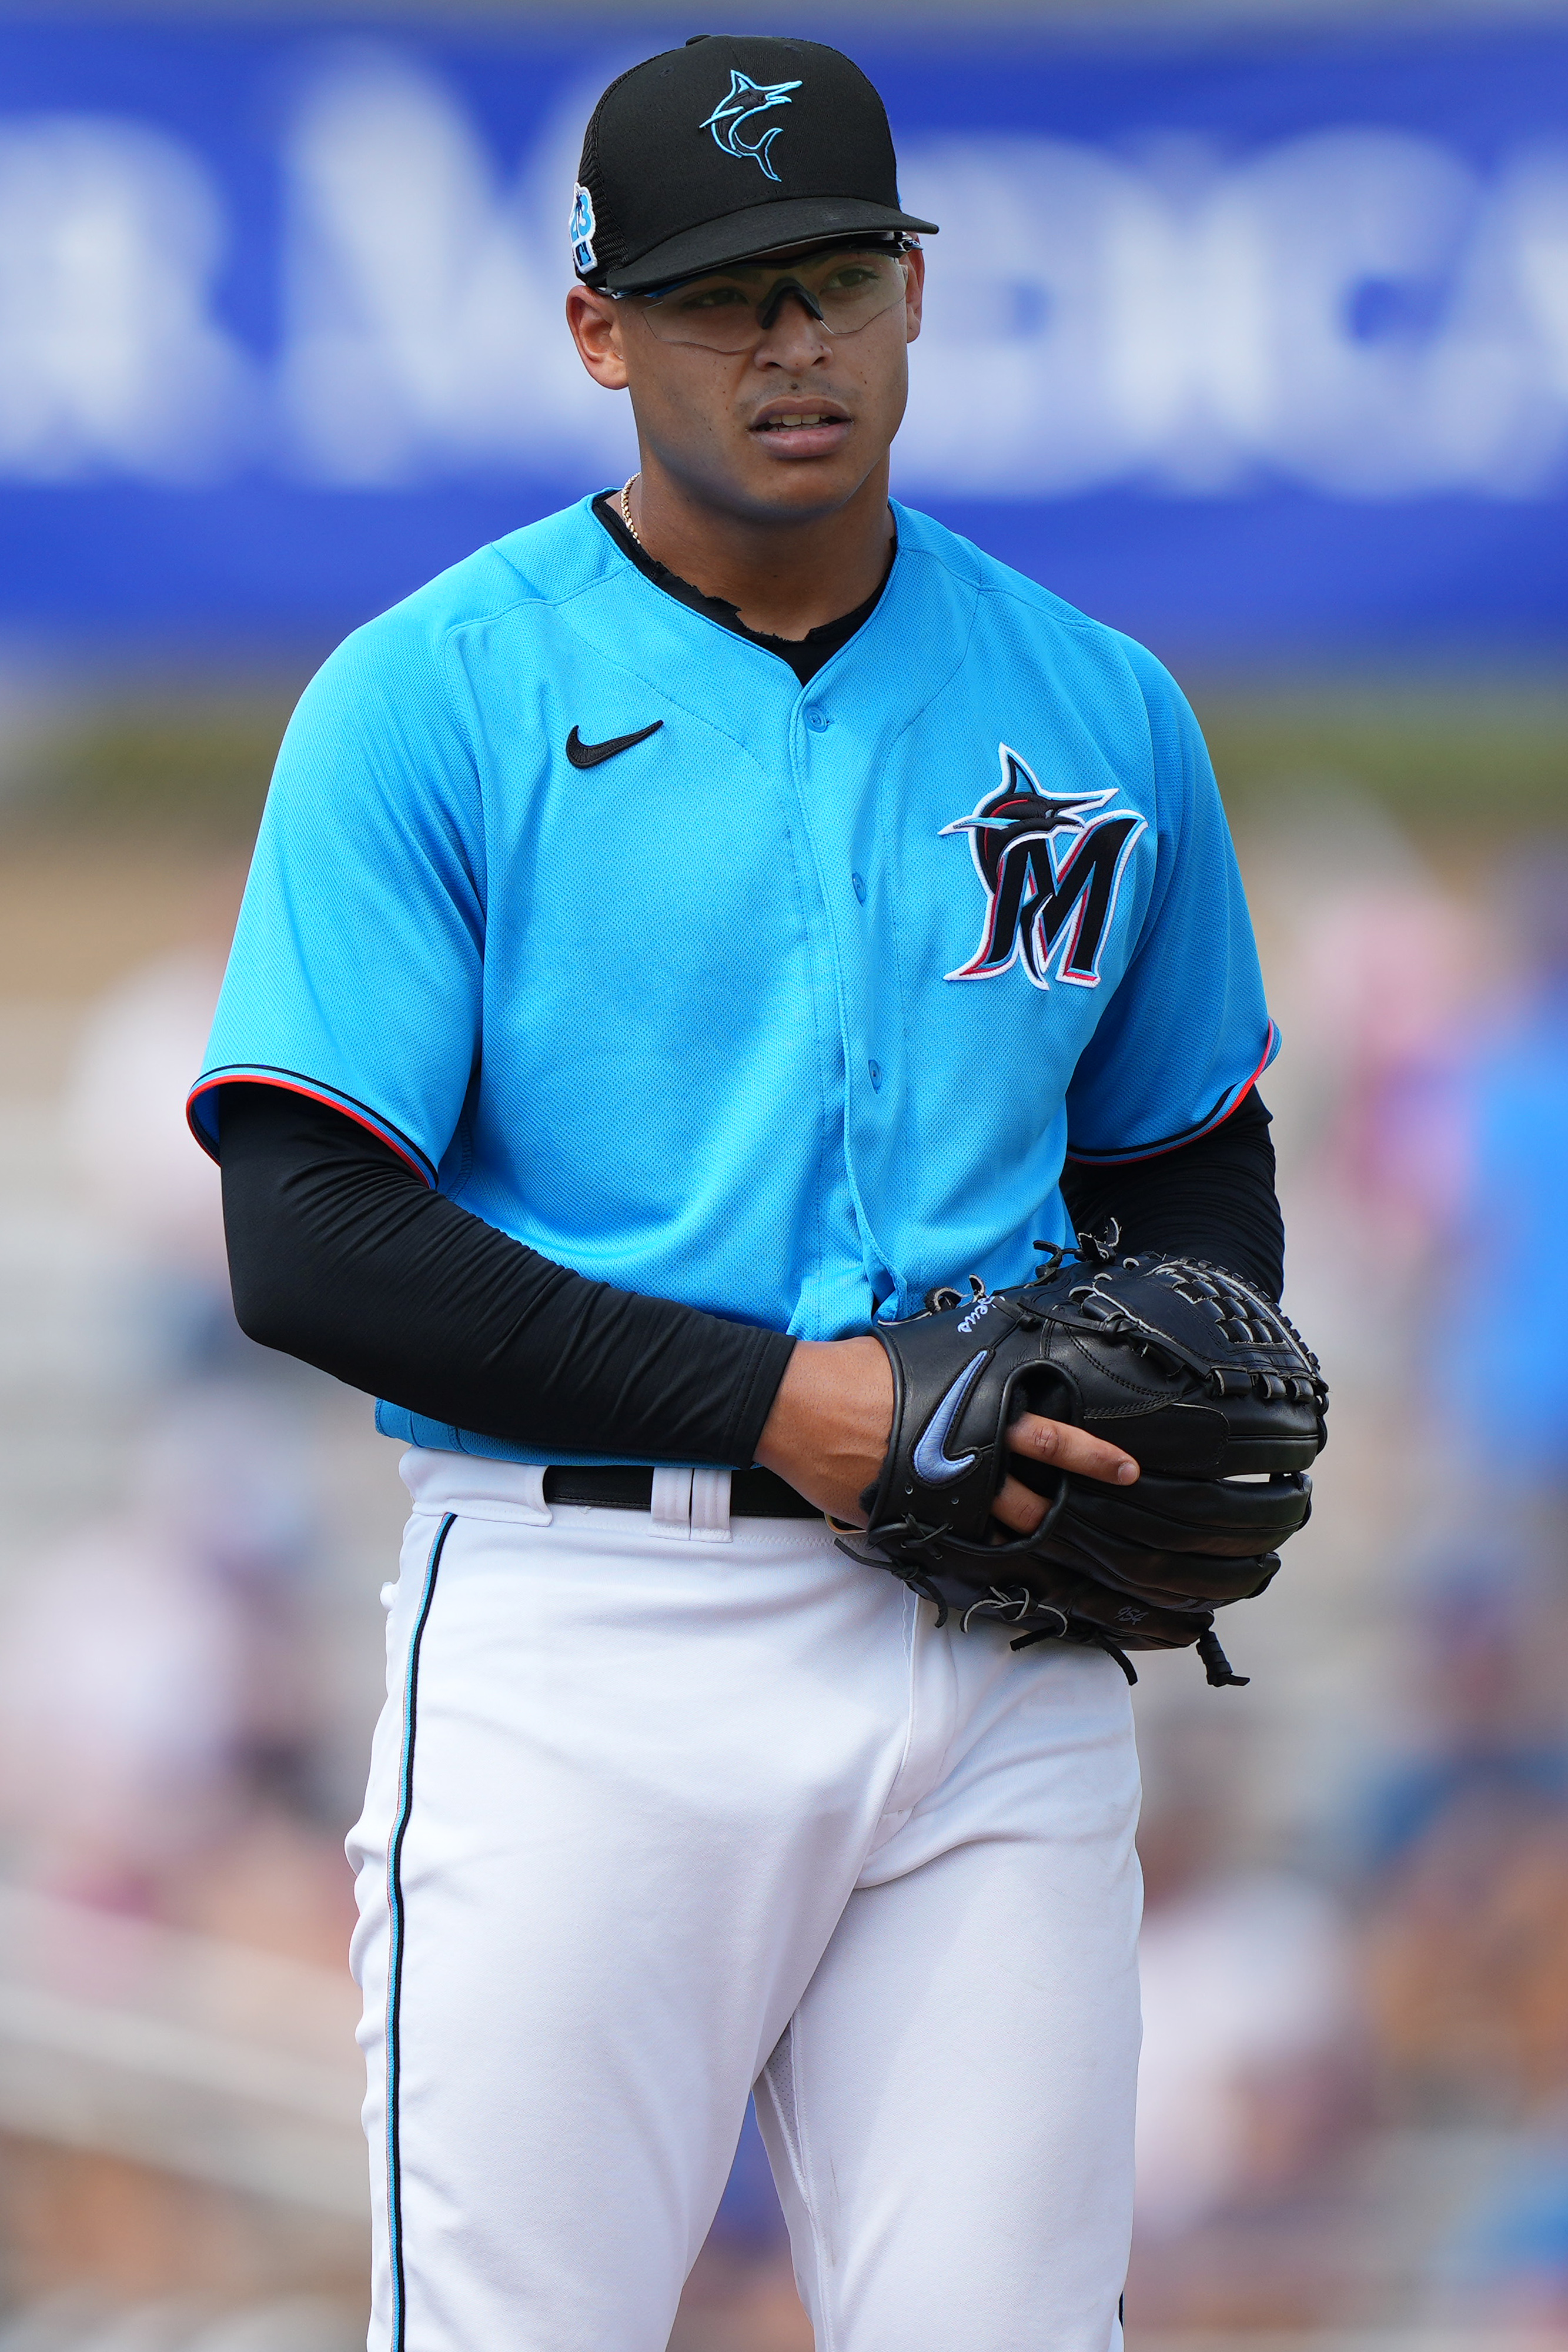 Jesus Luzardo #44 of the Miami Marlins stands on the mound in the first innign of the game against the New York Mets at Roger Dean Stadium on March 4, 2023 in Jupiter, Florida.